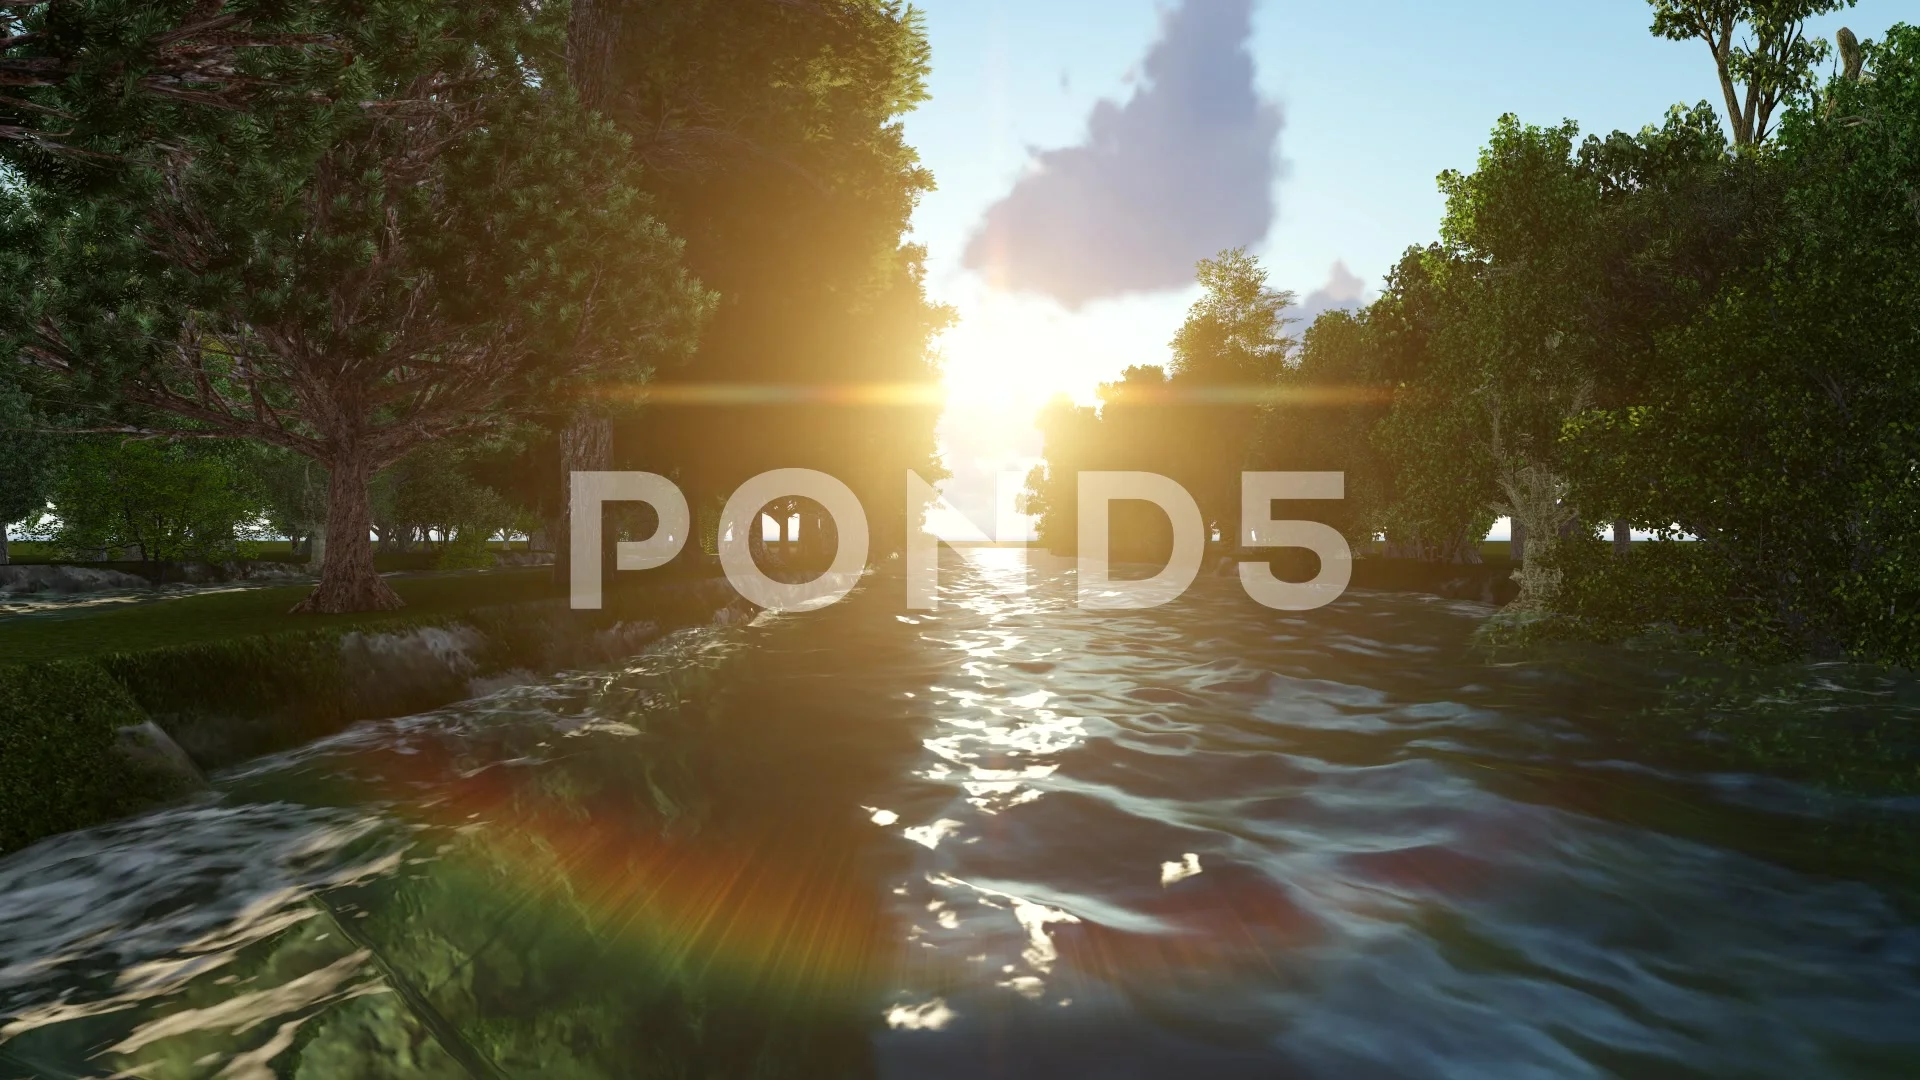 Nature Animated Video Moving Over River ... | Stock Video | Pond5